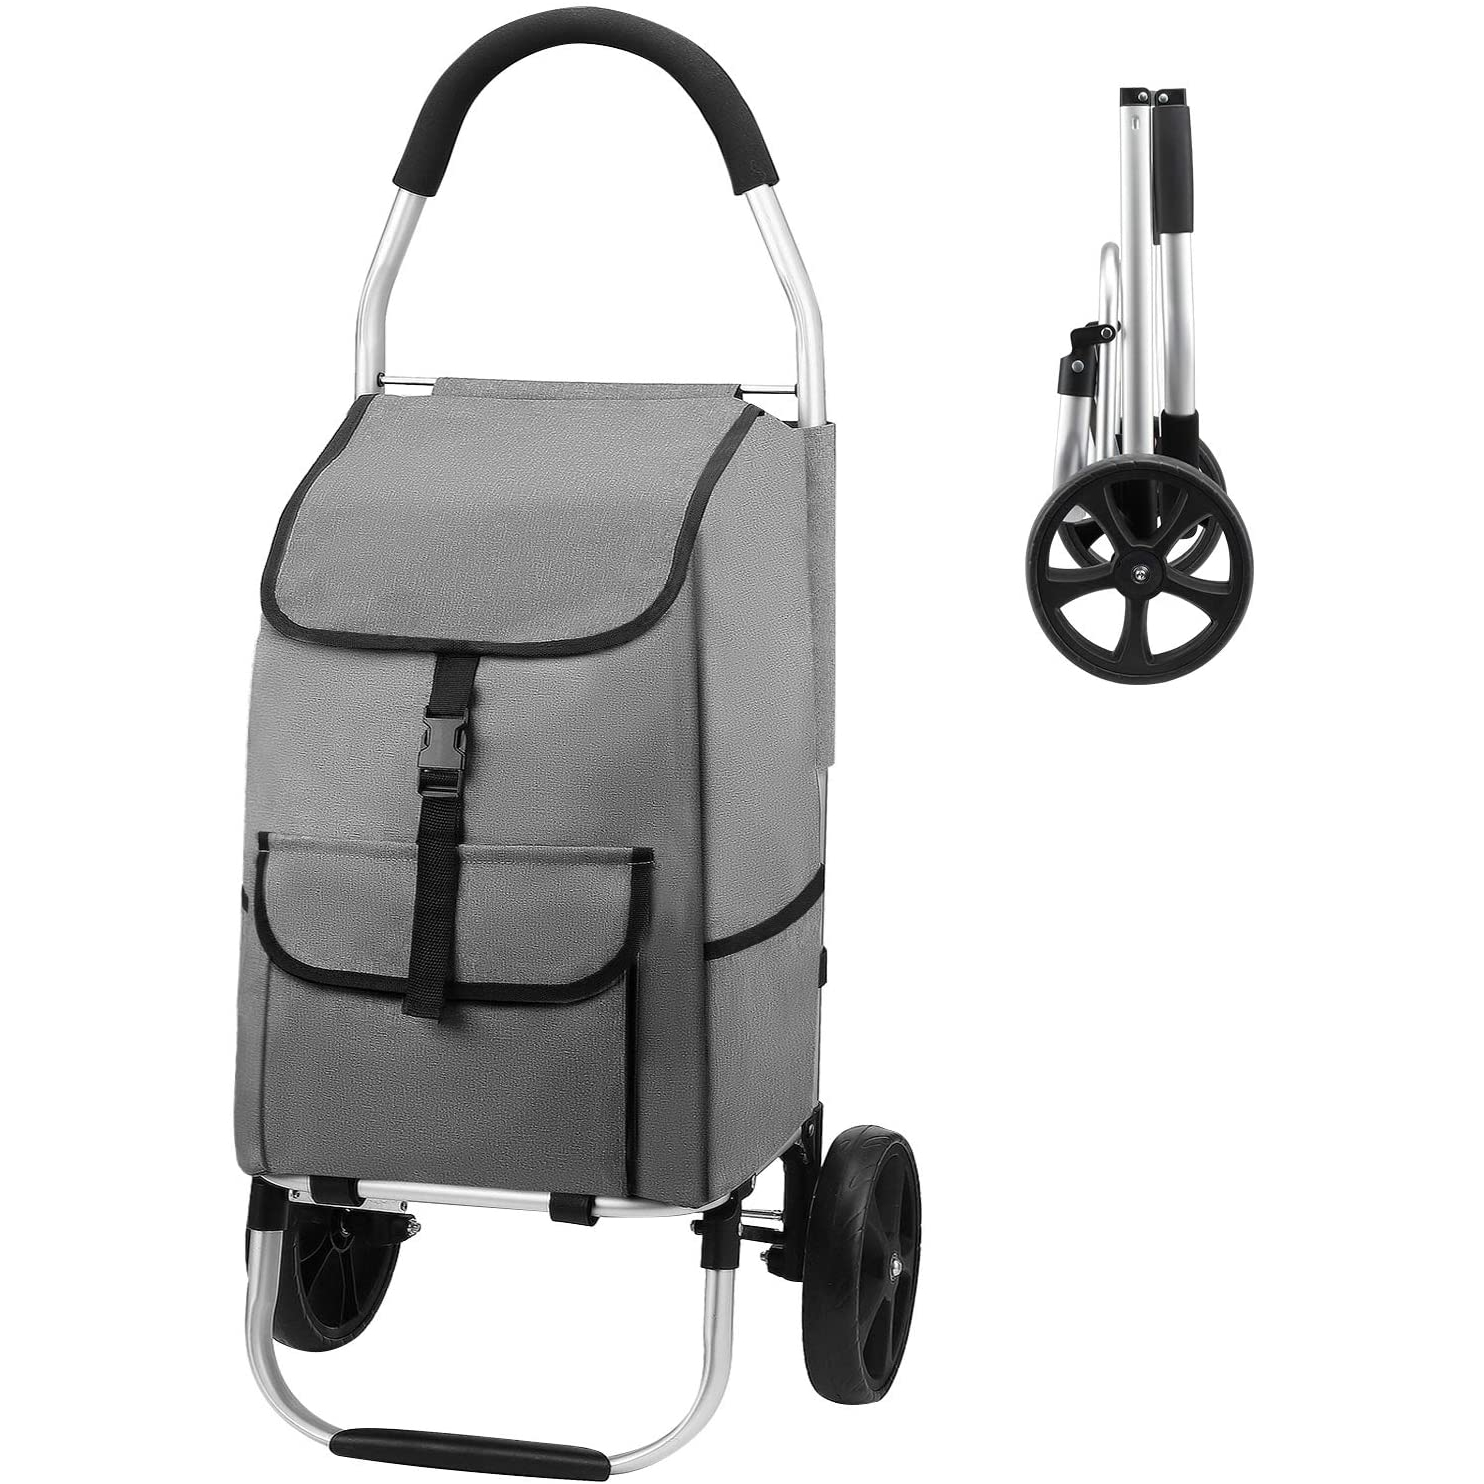 Promotional Foldable Shopping Trolley Bags with Detachable Bag